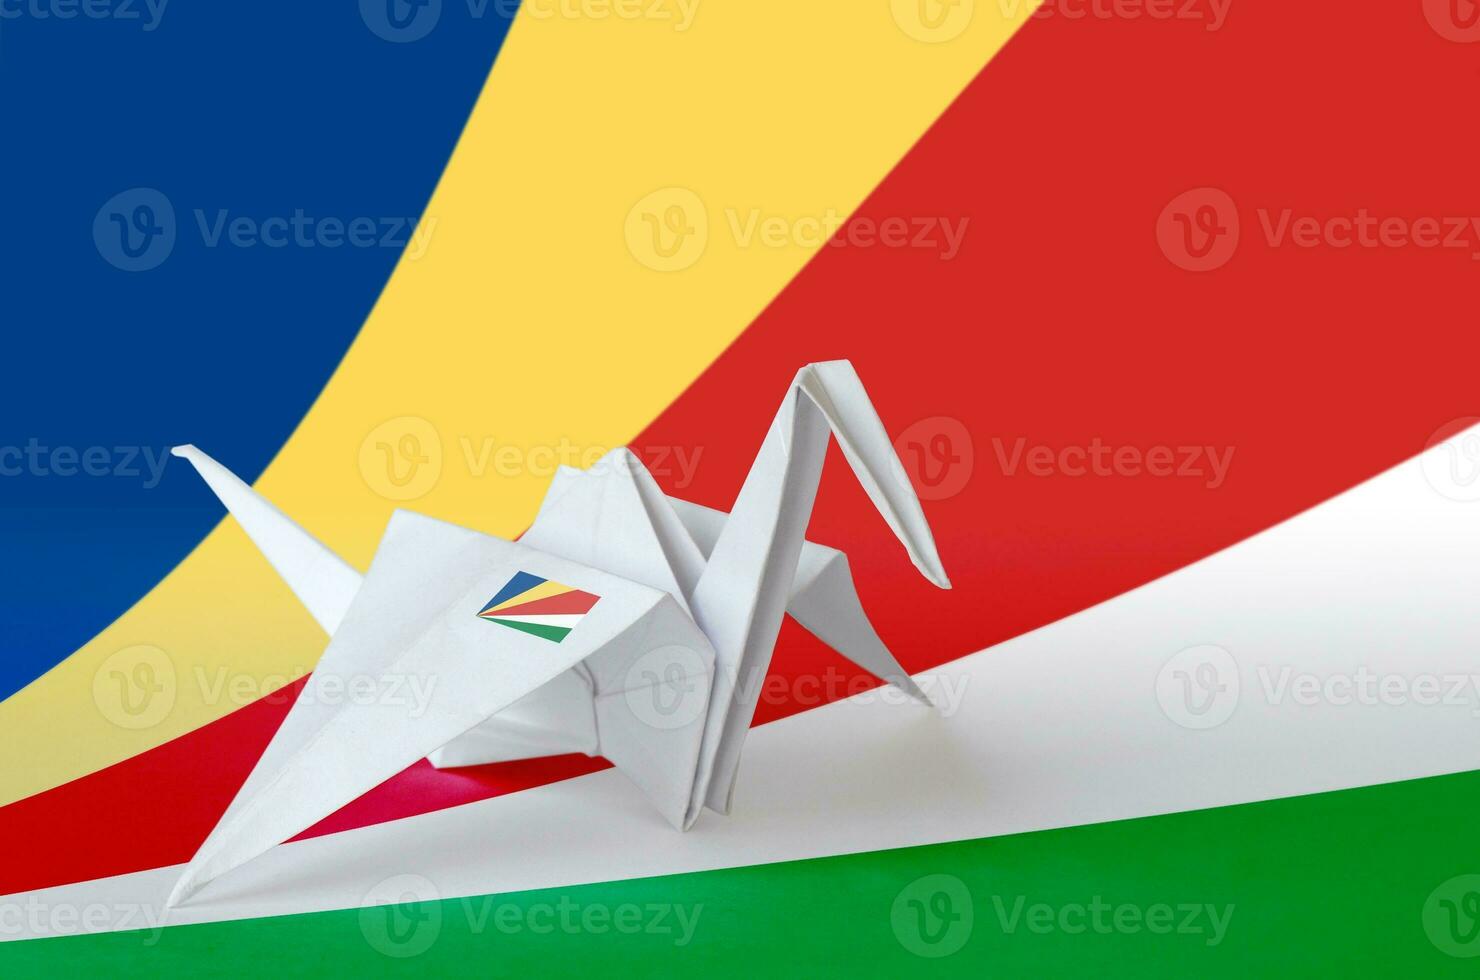 Seychelles flag depicted on paper origami crane wing. Handmade arts concept photo